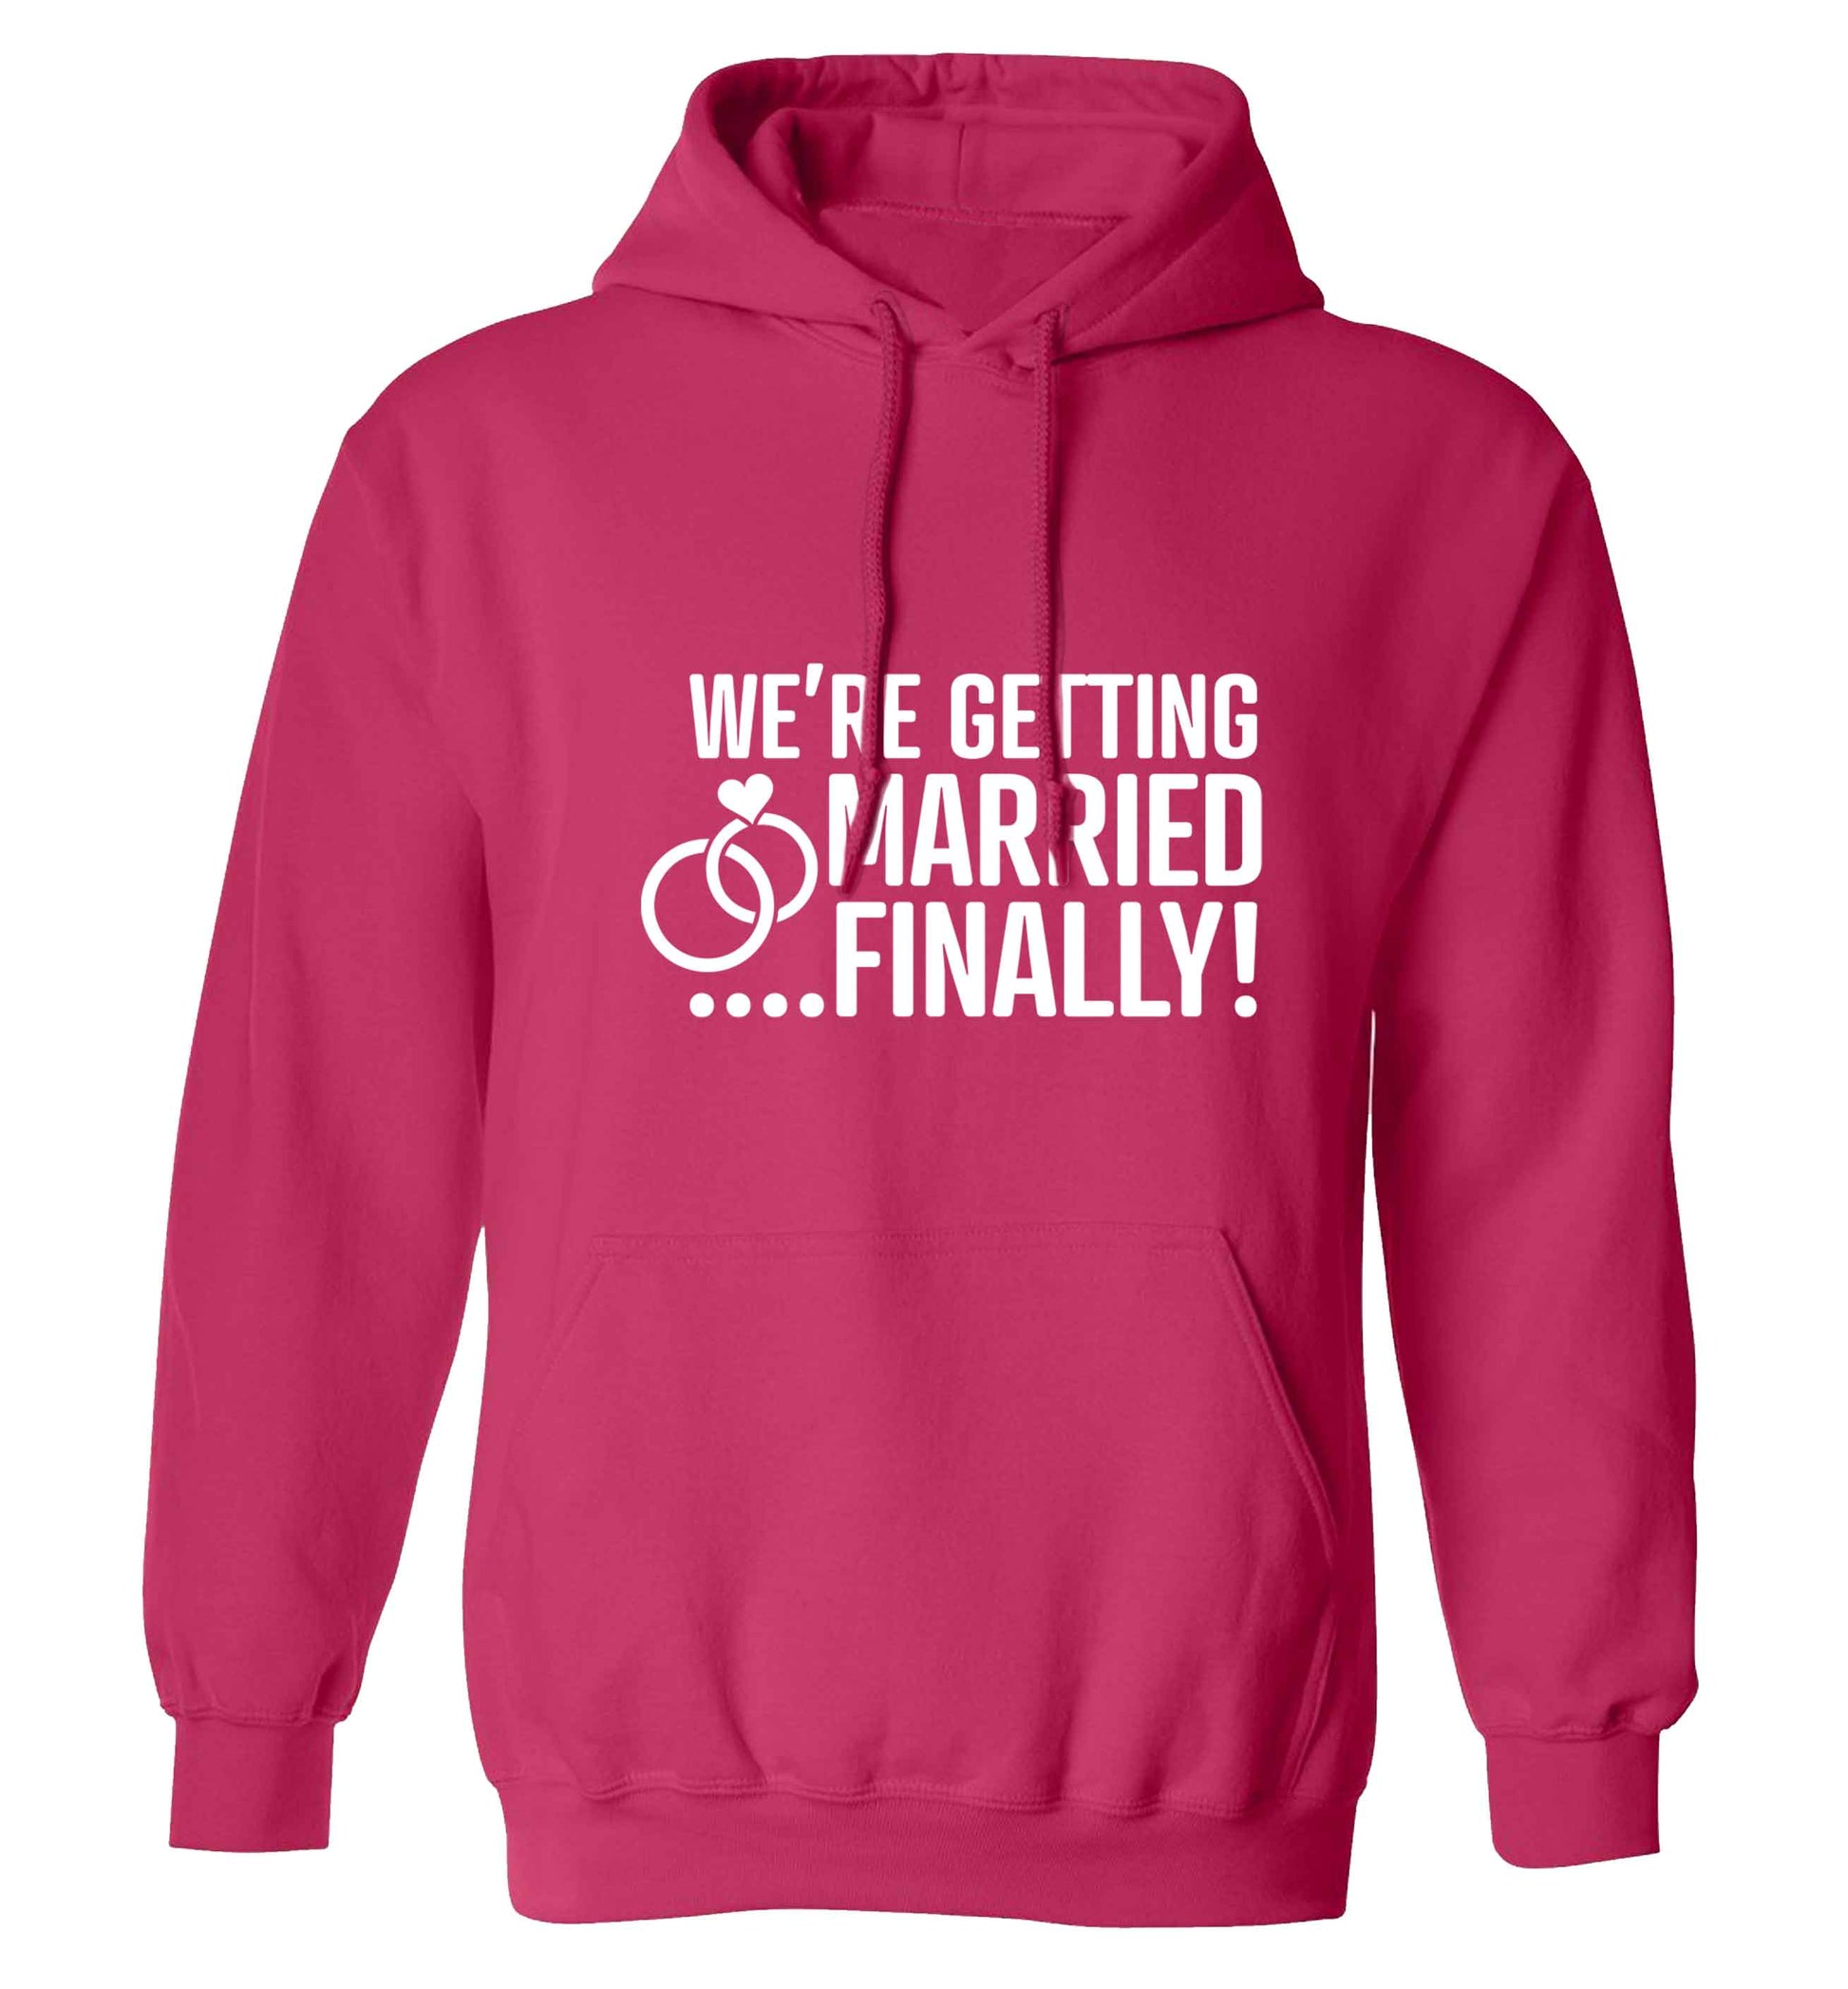 It's been a long wait but it's finally happening! Let everyone know you're celebrating your big day soon! adults unisex pink hoodie 2XL